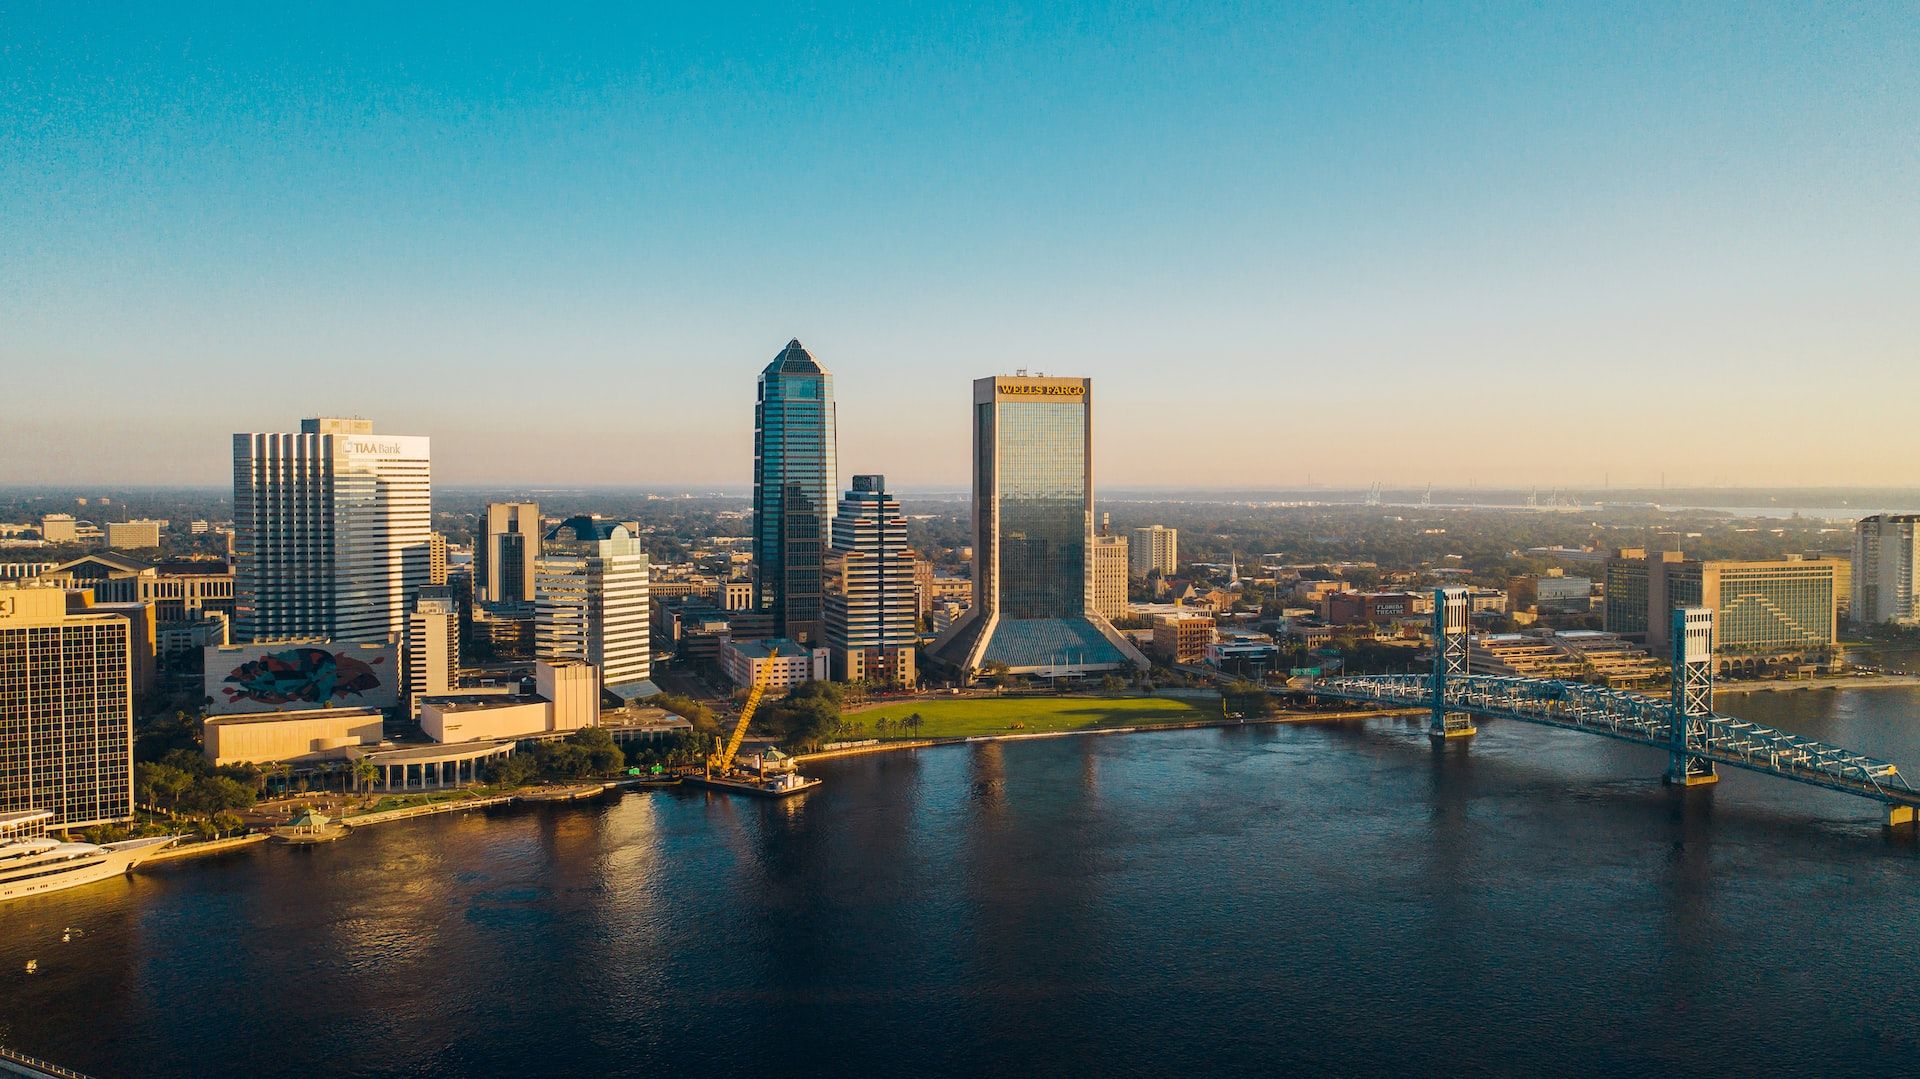 A view of Jacksonville